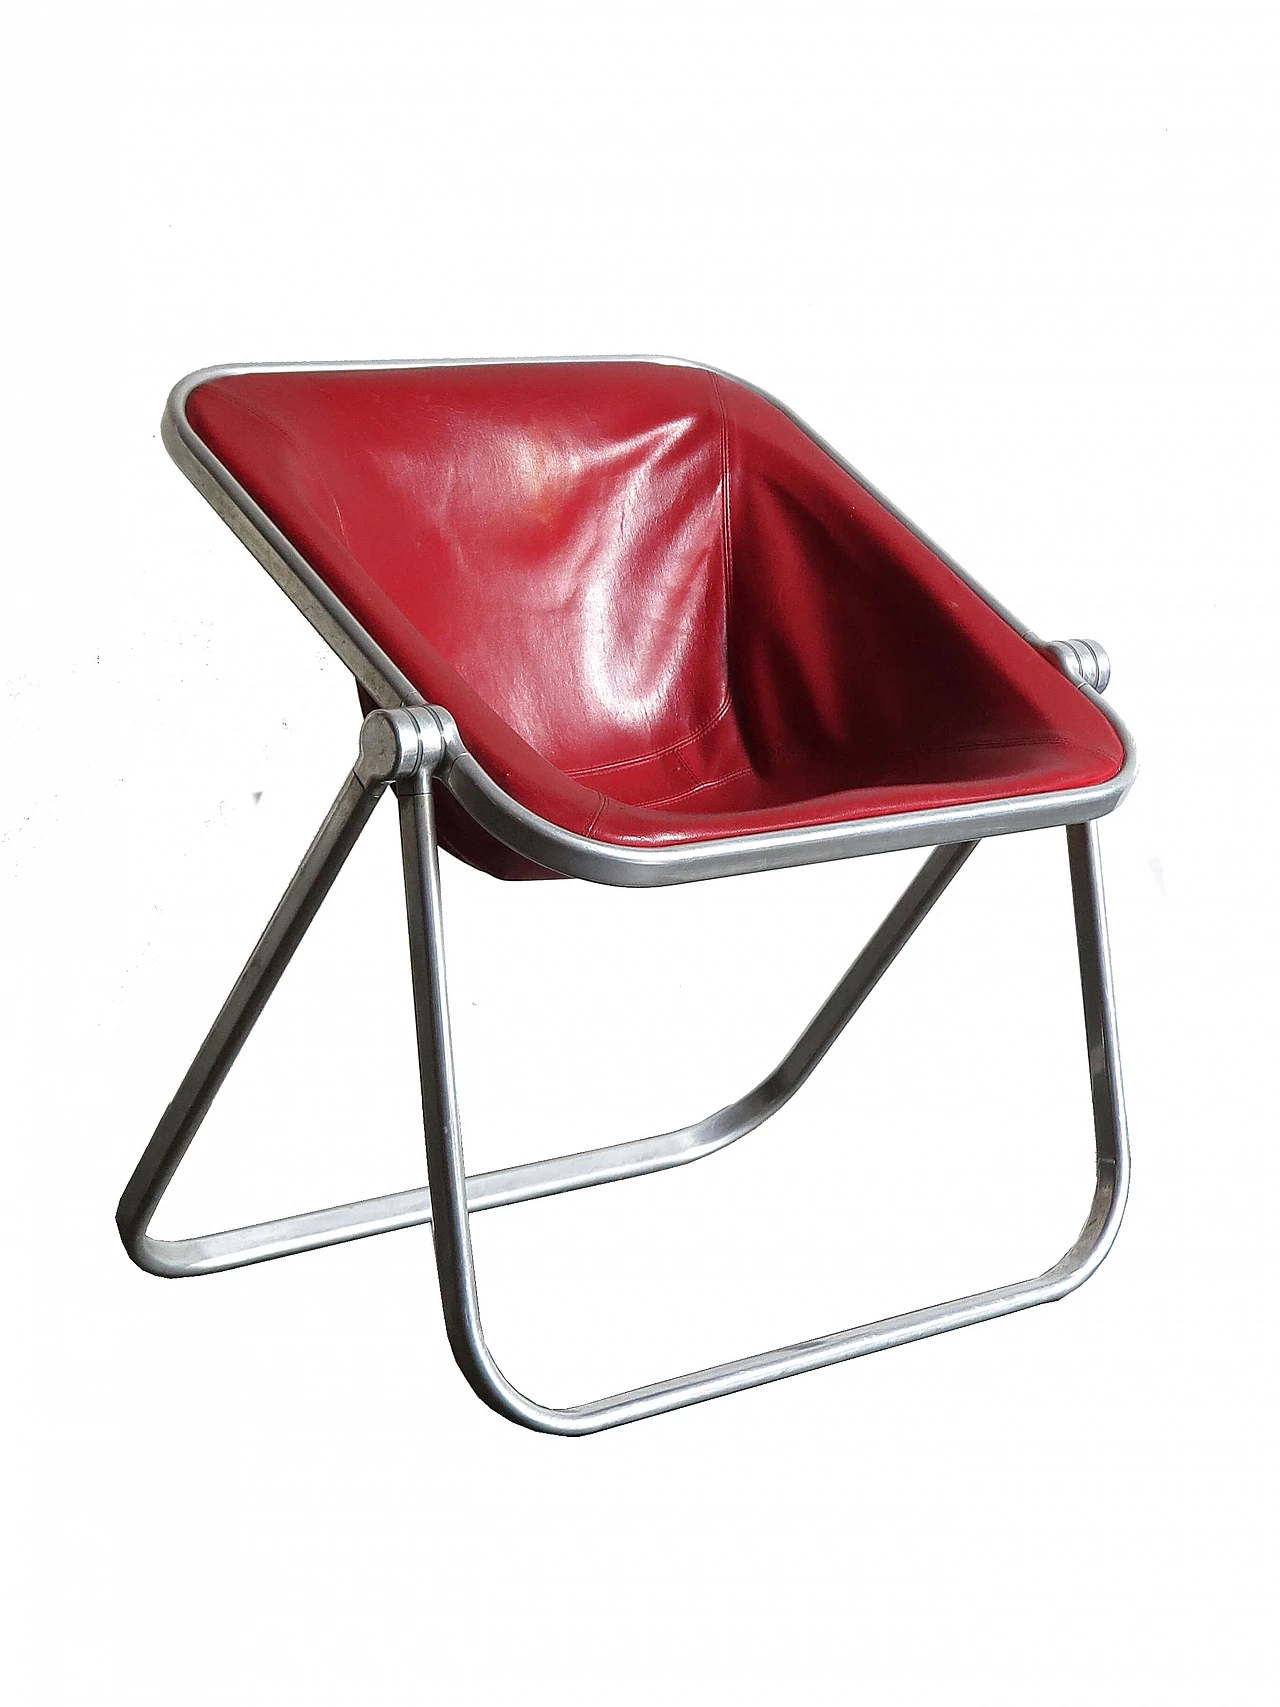 Red leather armchair Plona by Giancarlo Piretti for Anonima Castelli, 1970 1176864